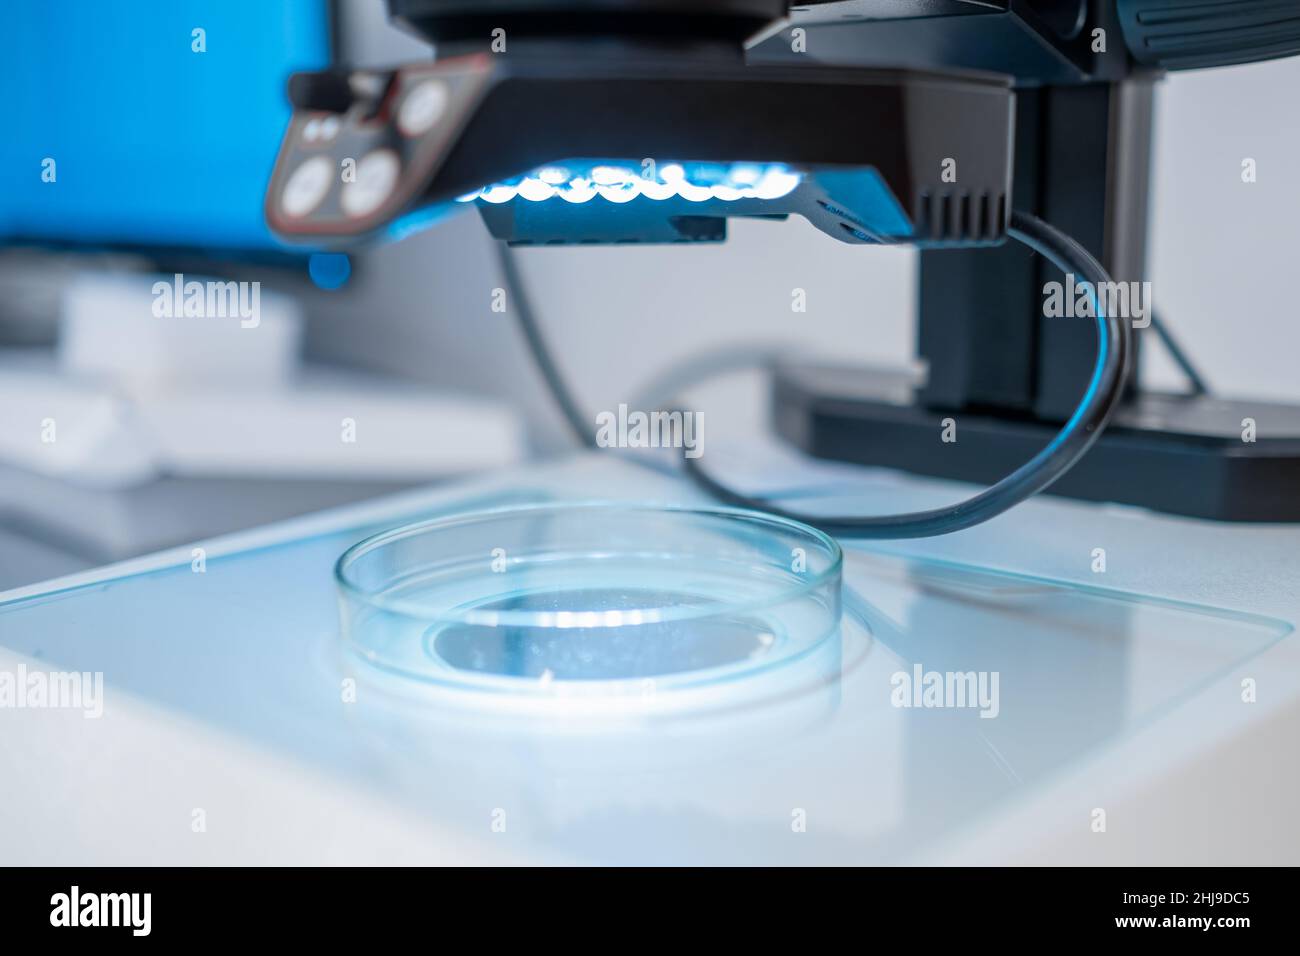 A modern electronic microscope for examing samples in Petri dish in the biochemical or medical laboratory. Stock Photo